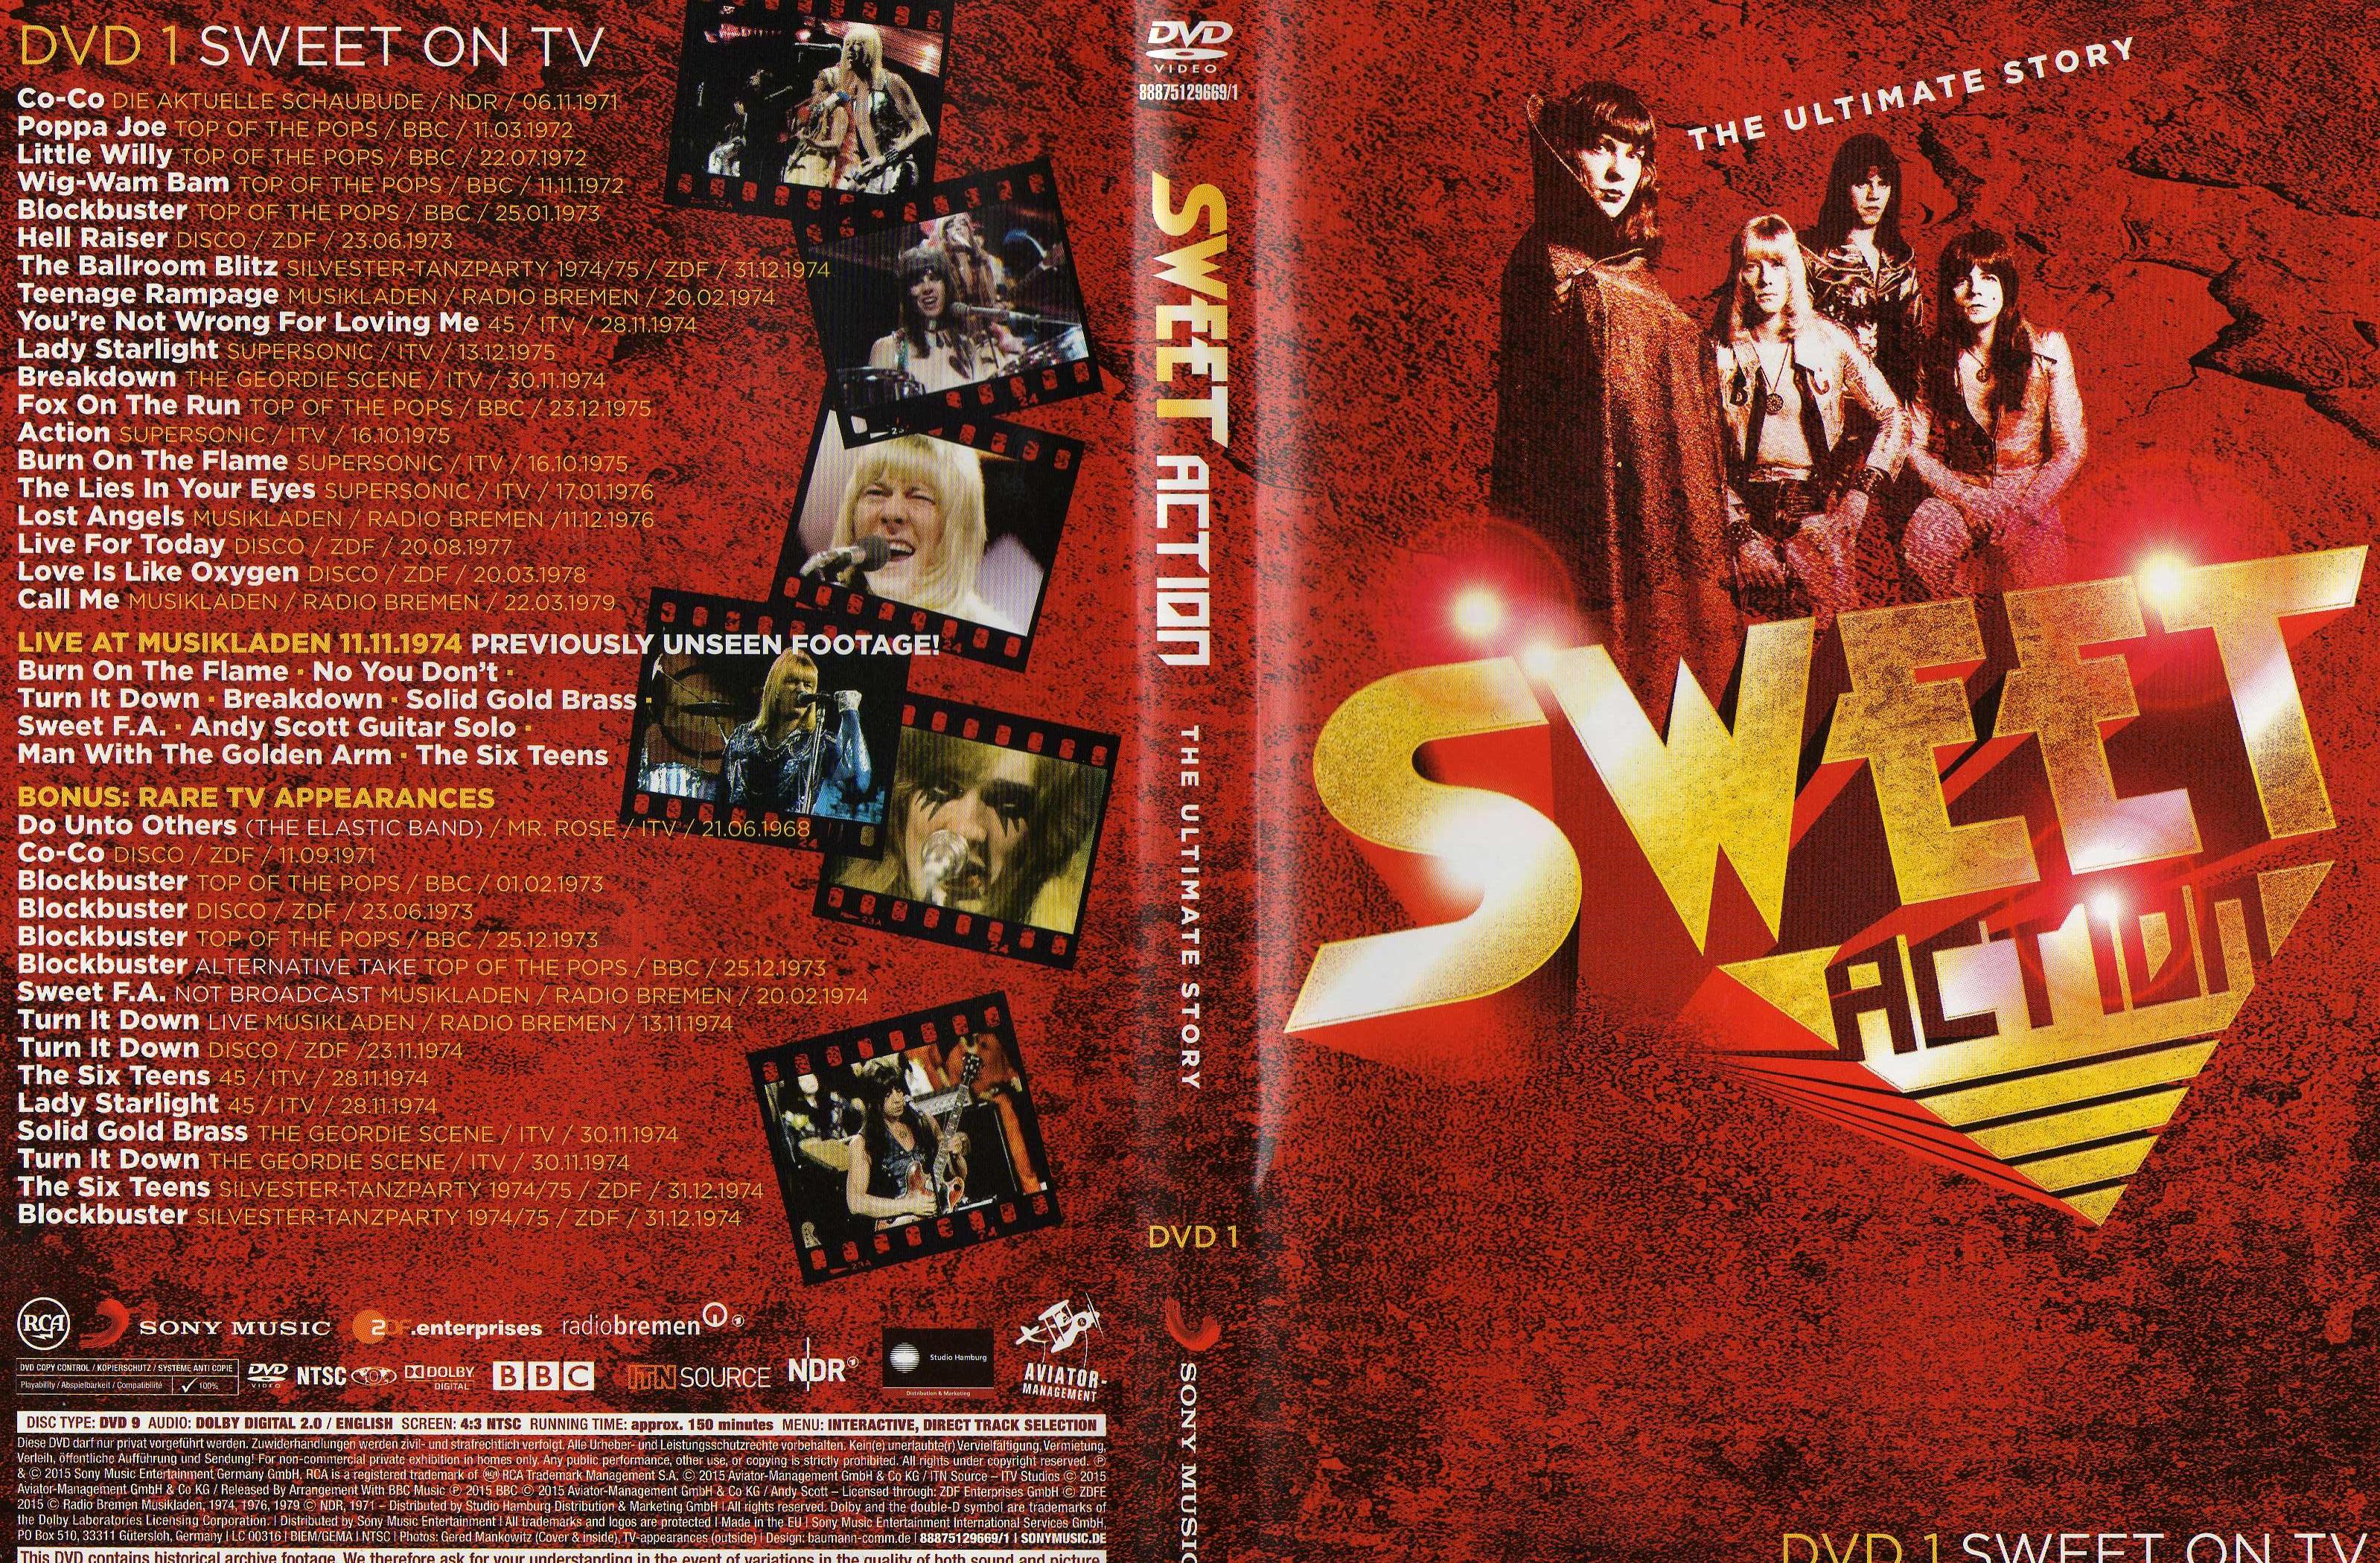 The Sweet - Action (Ultimate Story) (DVD1-Sweet On TV) (2015) - front.